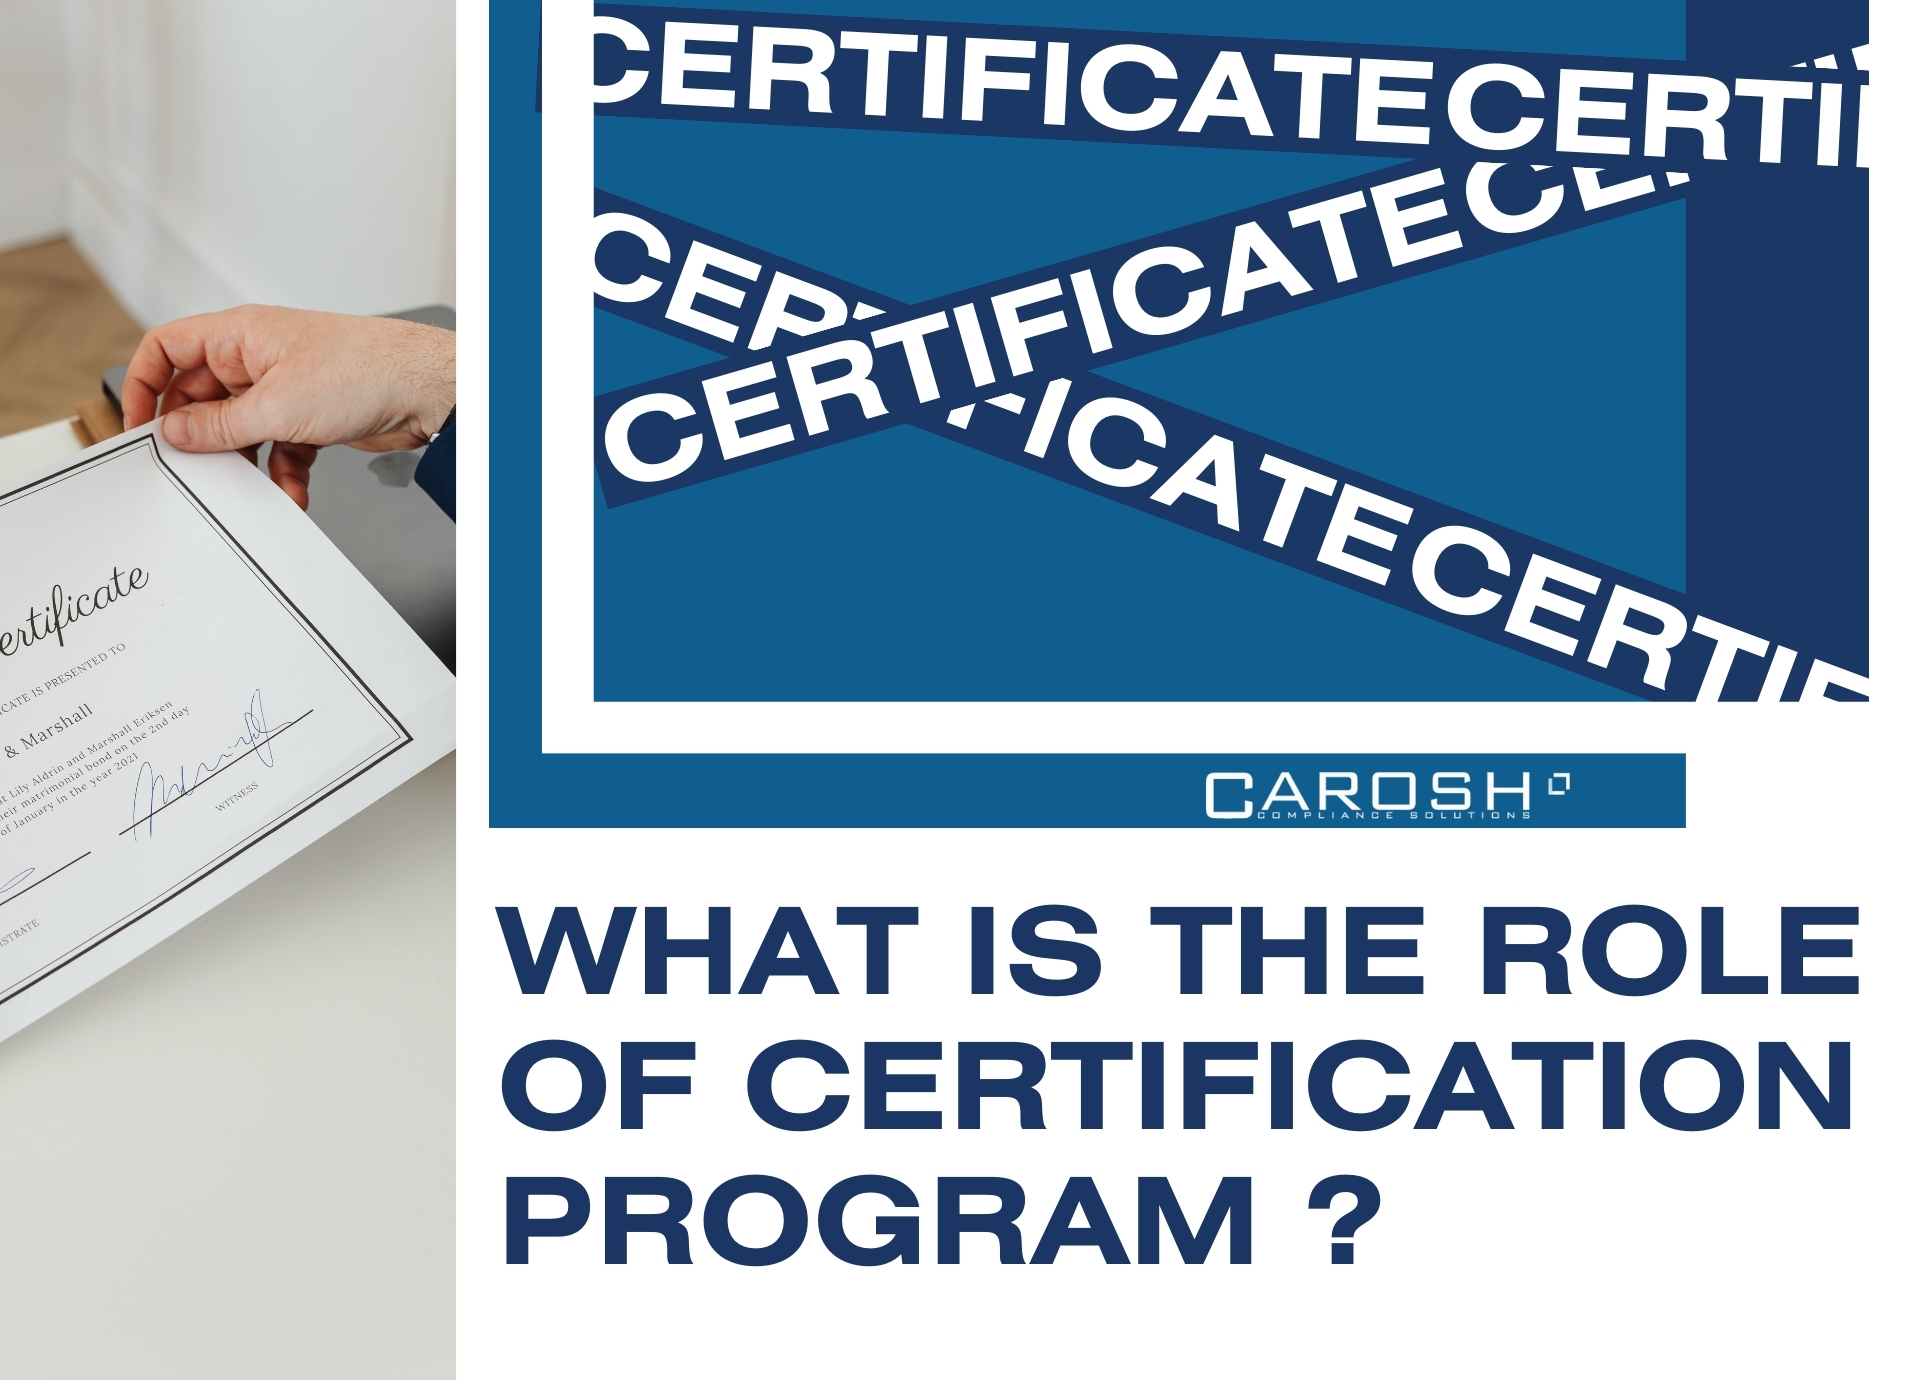 WHAT IS THE ROLE OF HIPAA CERTIFICATION PROGRAM